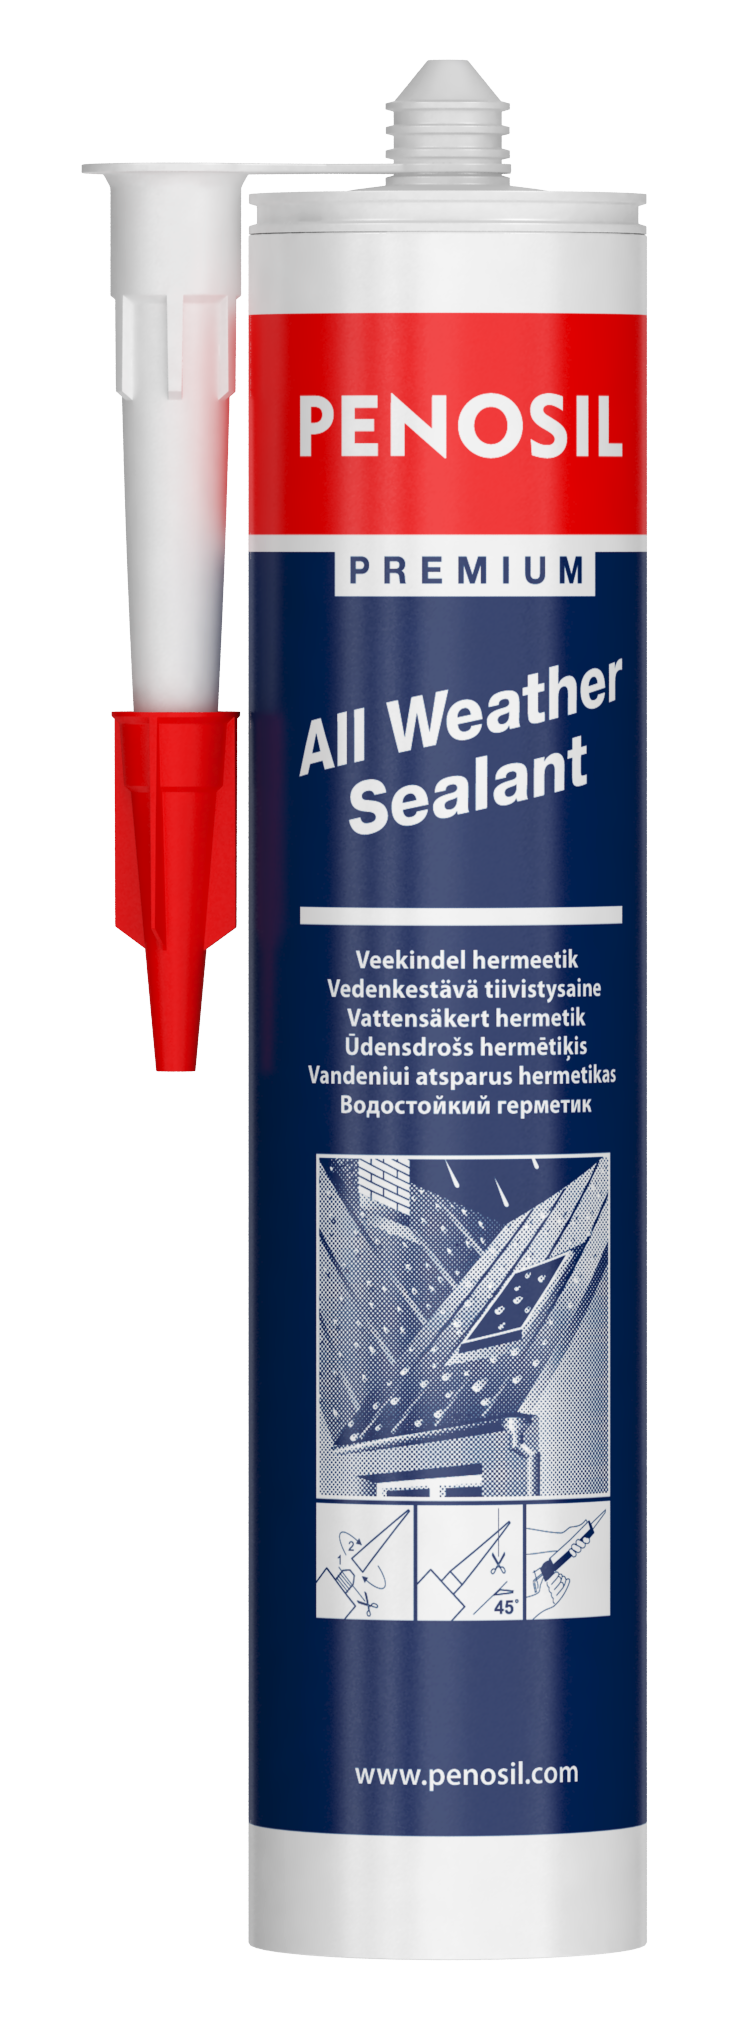 PENOSIL Premium All Weather Sealant - a water and mould resistant sealant 